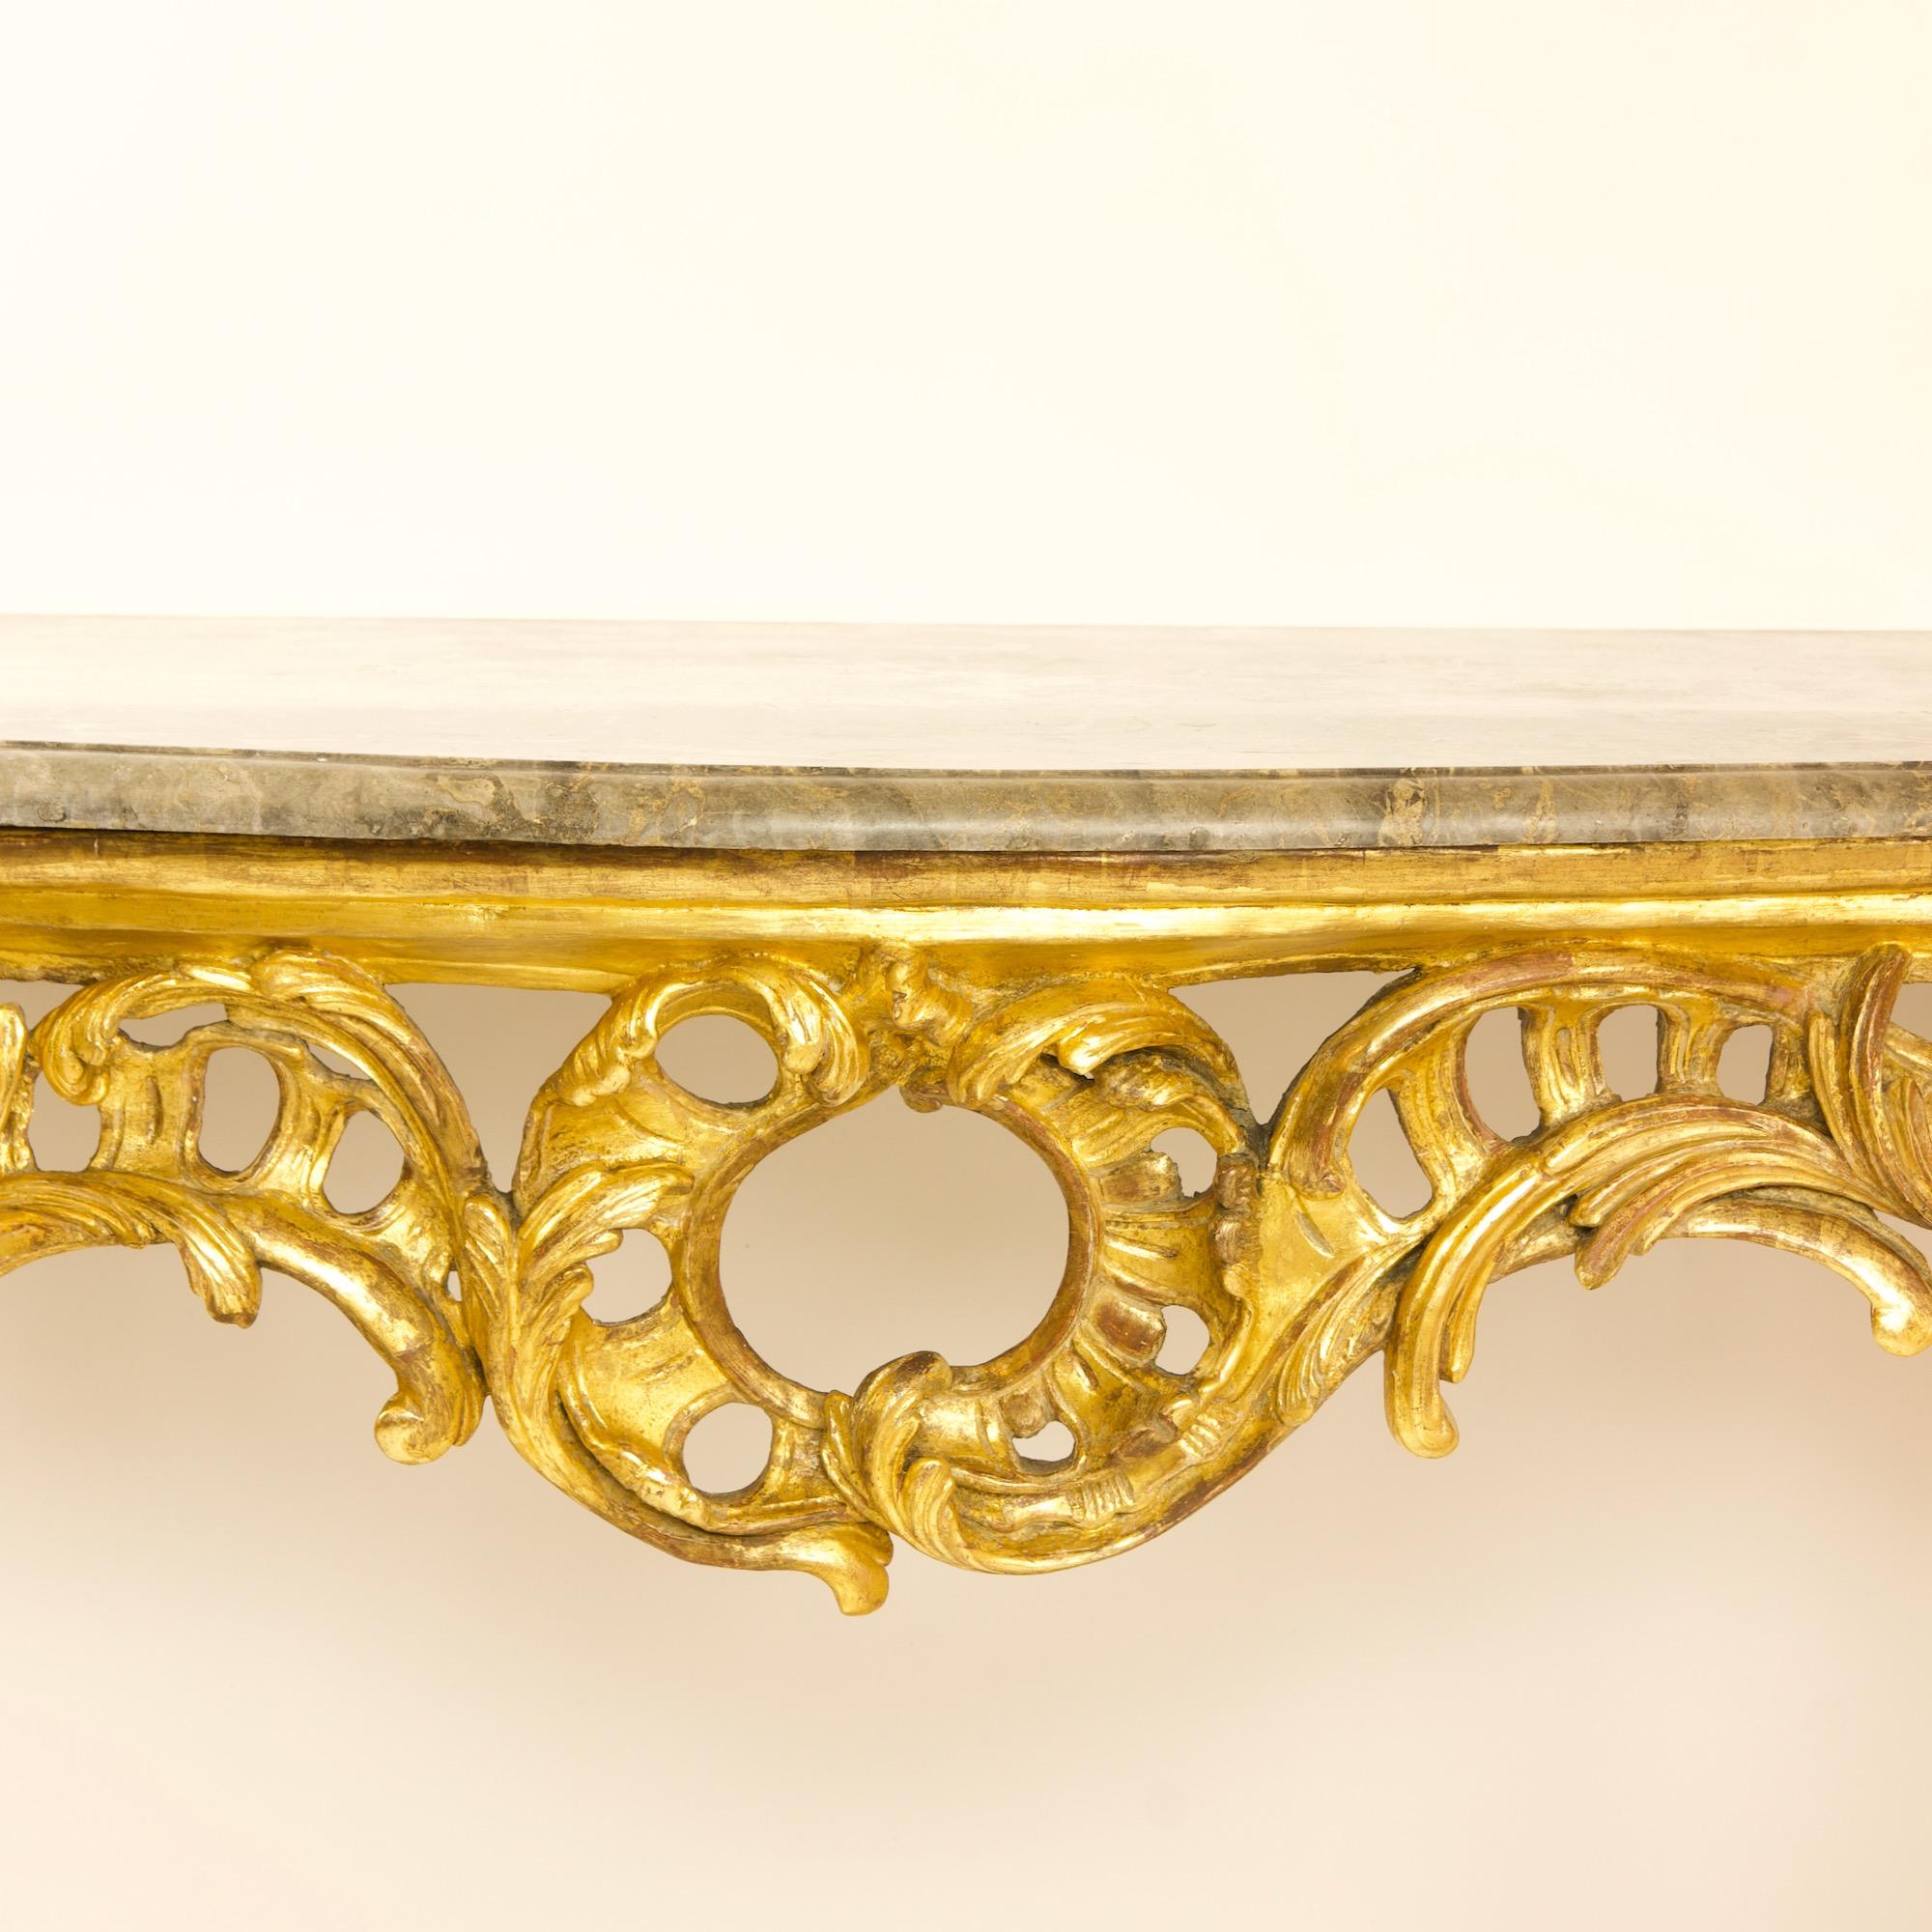 18th century large French Louis XV carved giltwood rocaille console table

A large mid 18th century Louis XV console table with a pierced frieze carved with rocaille and leaves, with a large central rocaille motif and stylised rose buds on each